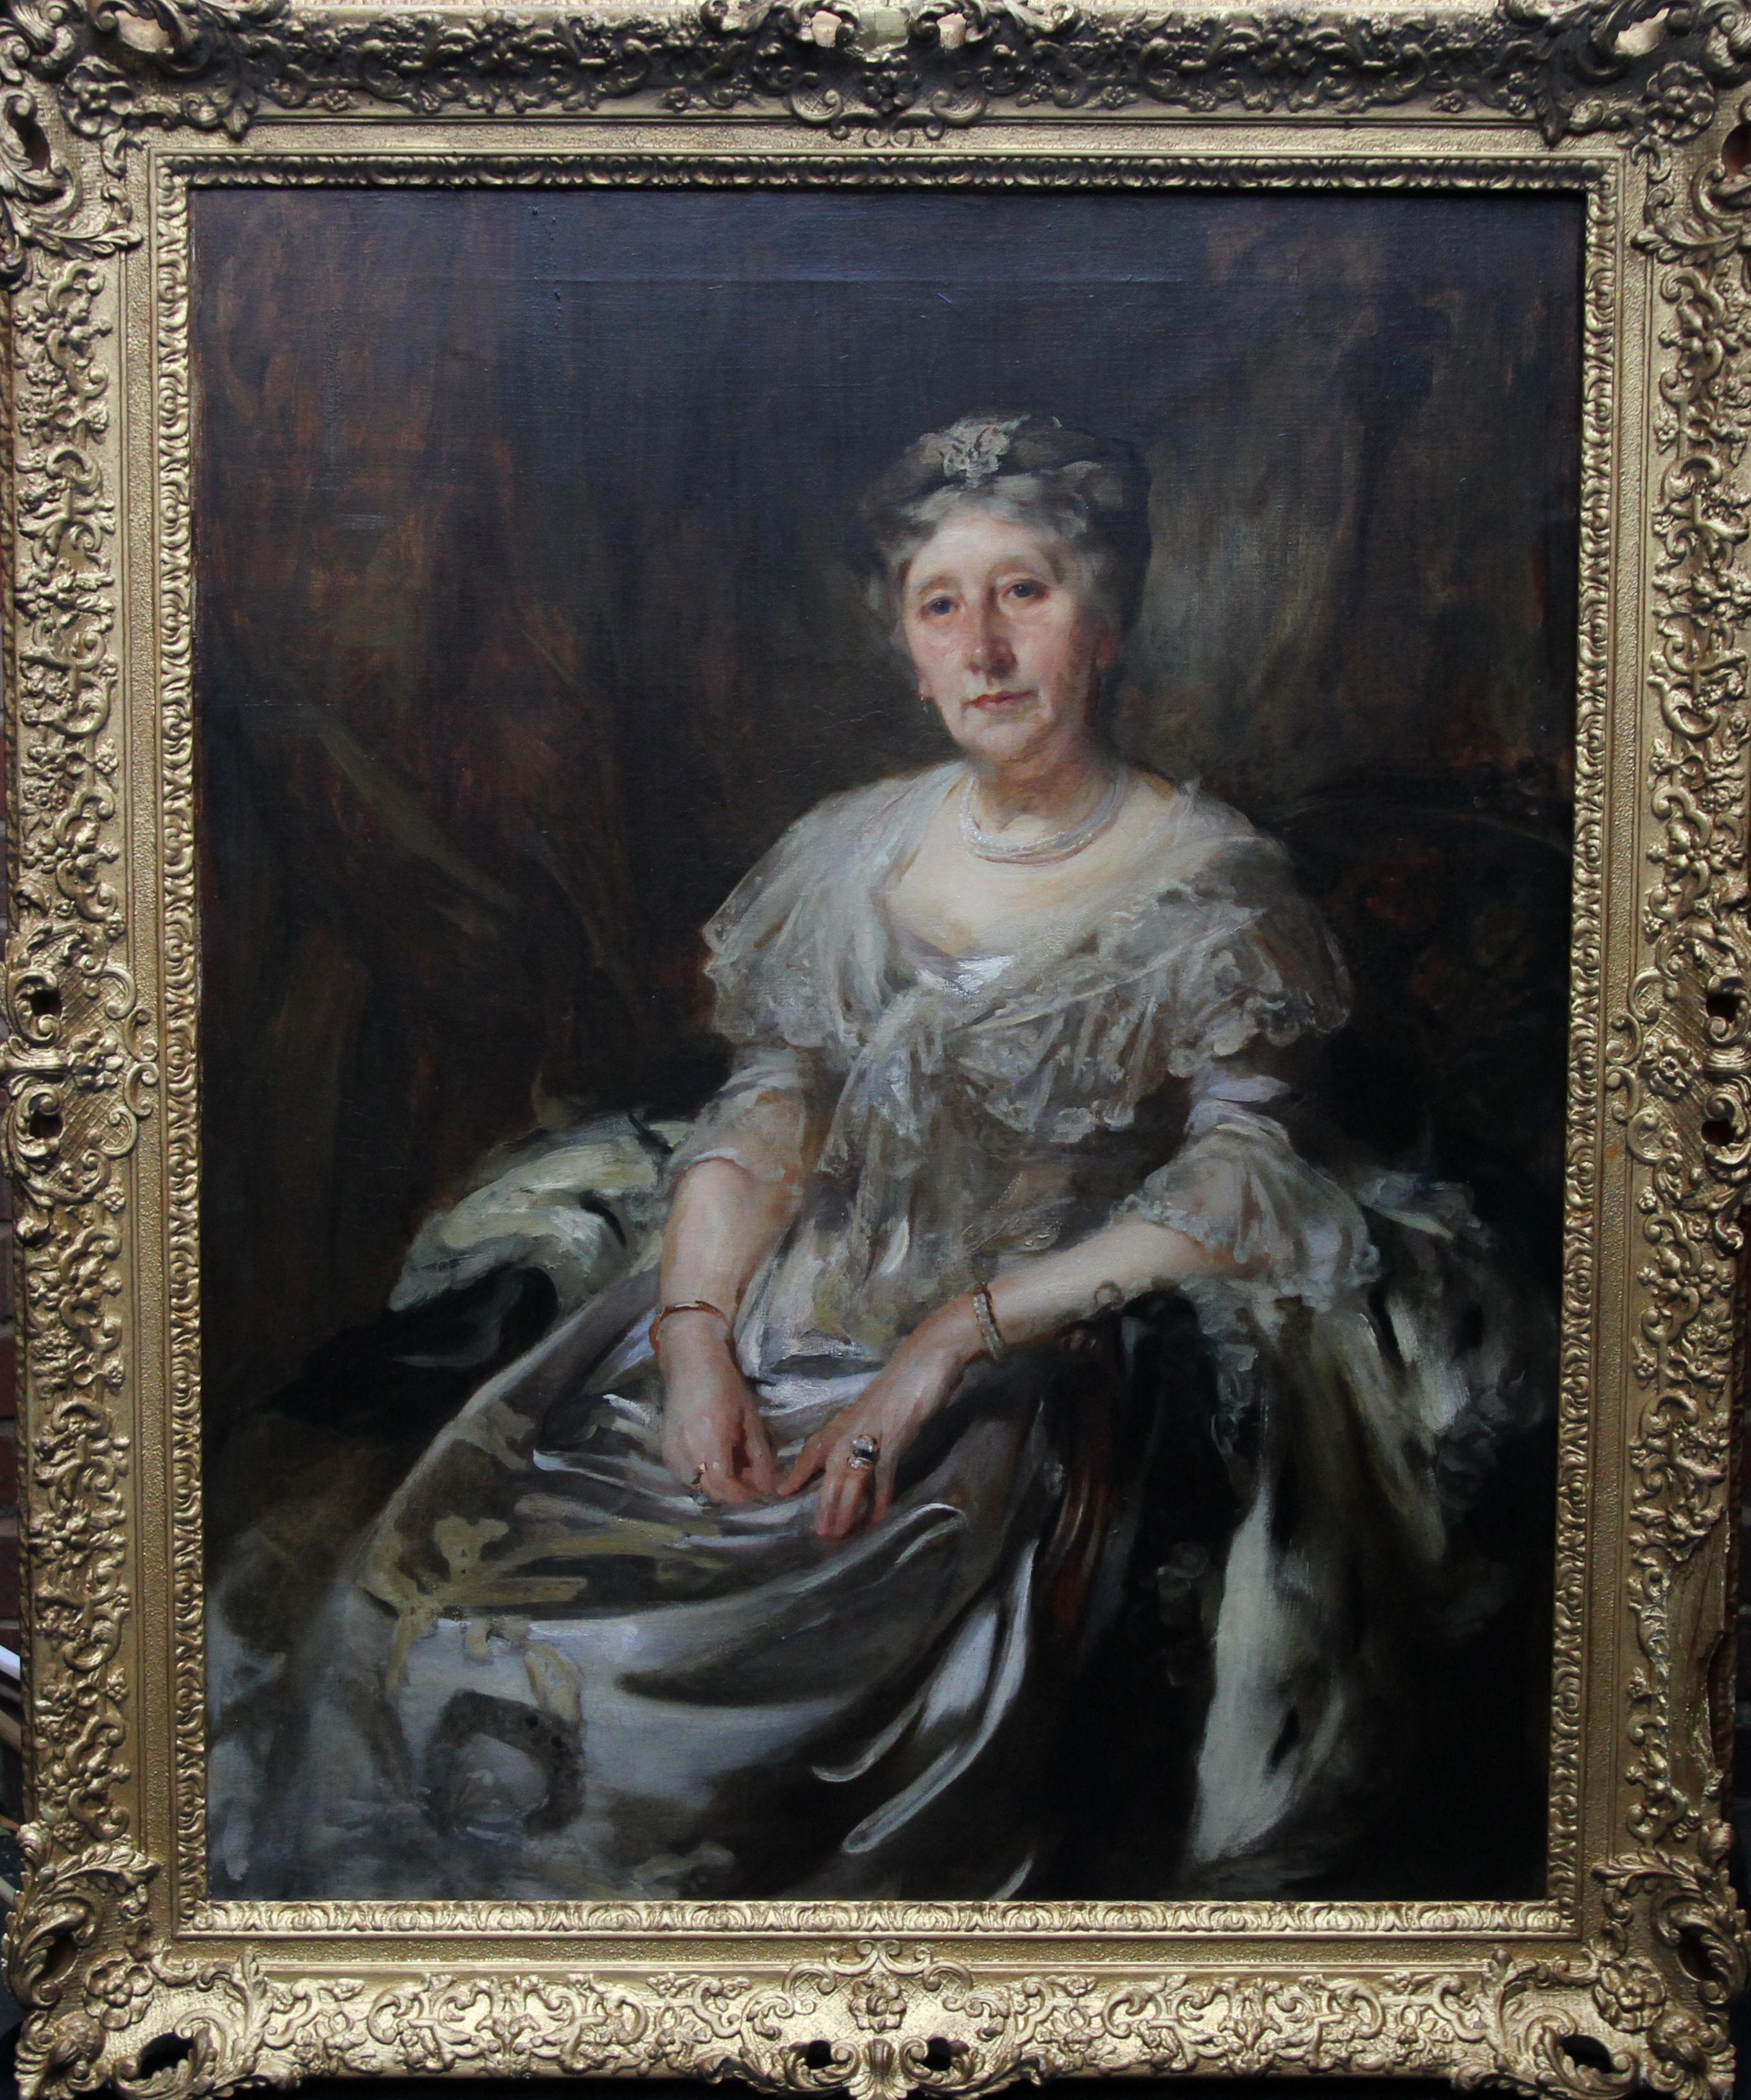  Portrait of Lady Ruthven - Edwardian Society British American art oil painting 